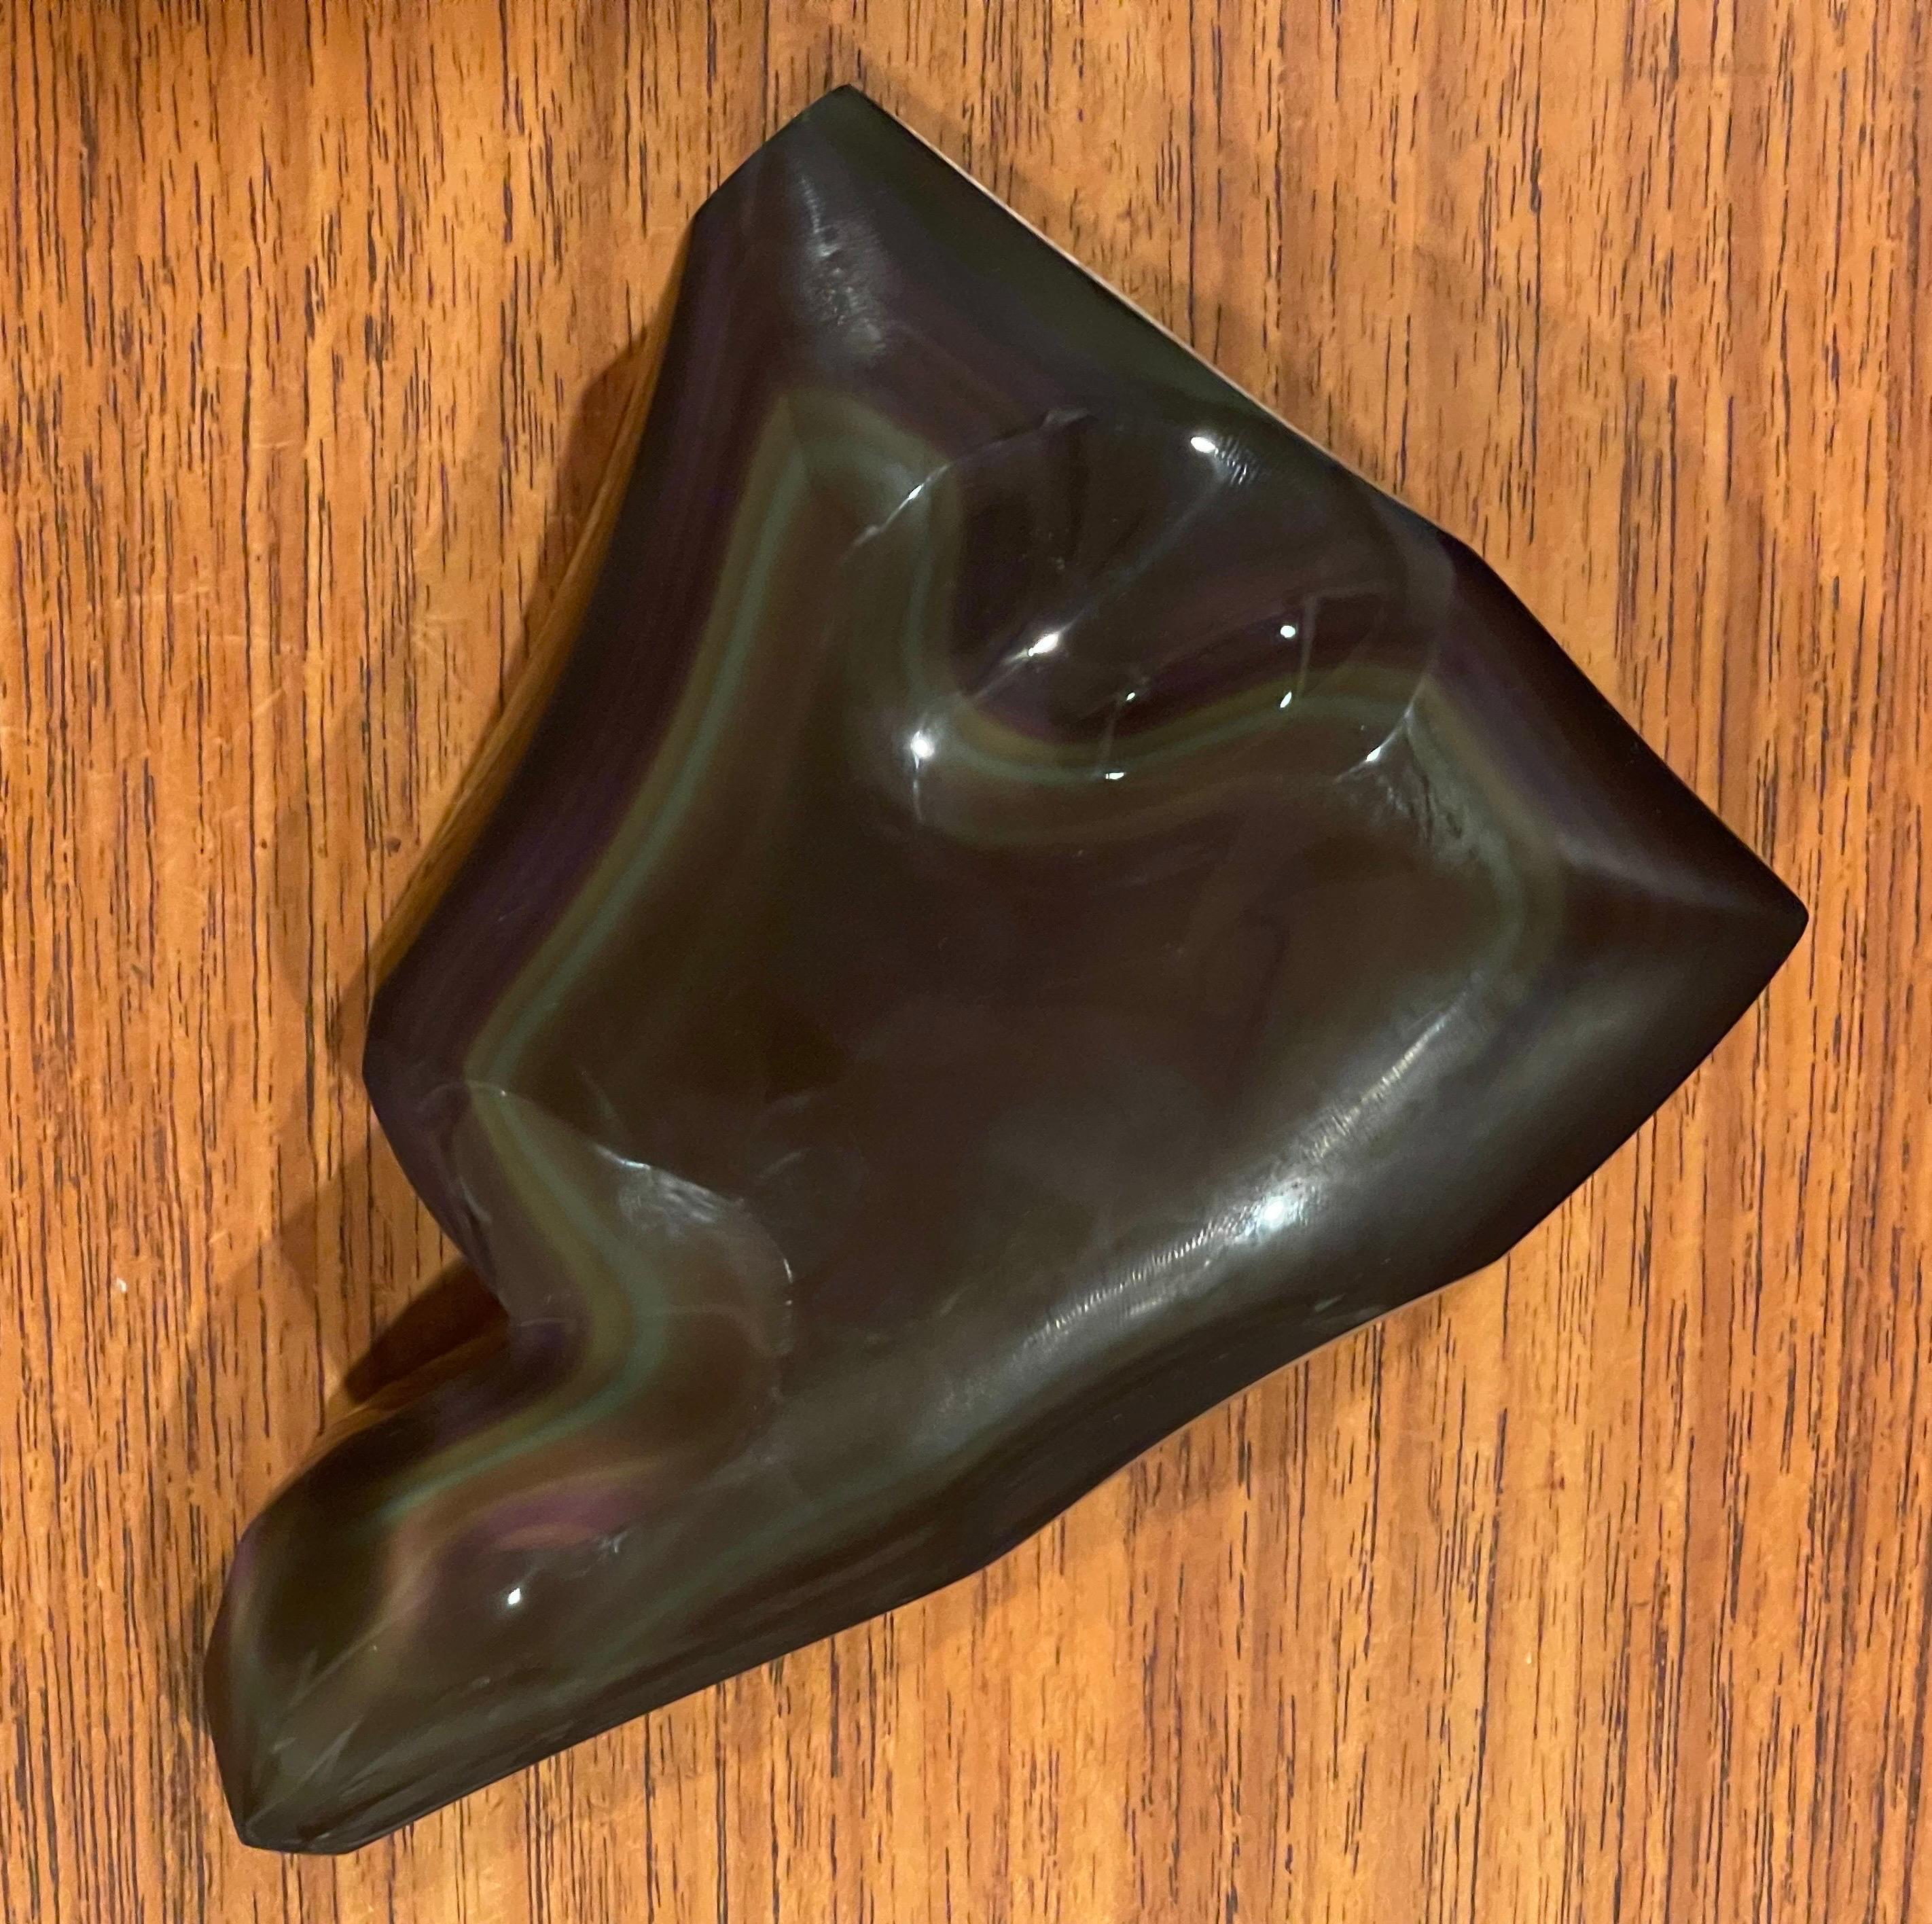 Gorgeous Highly Polished Rainbow Obsidian Paperweight In Good Condition For Sale In San Diego, CA